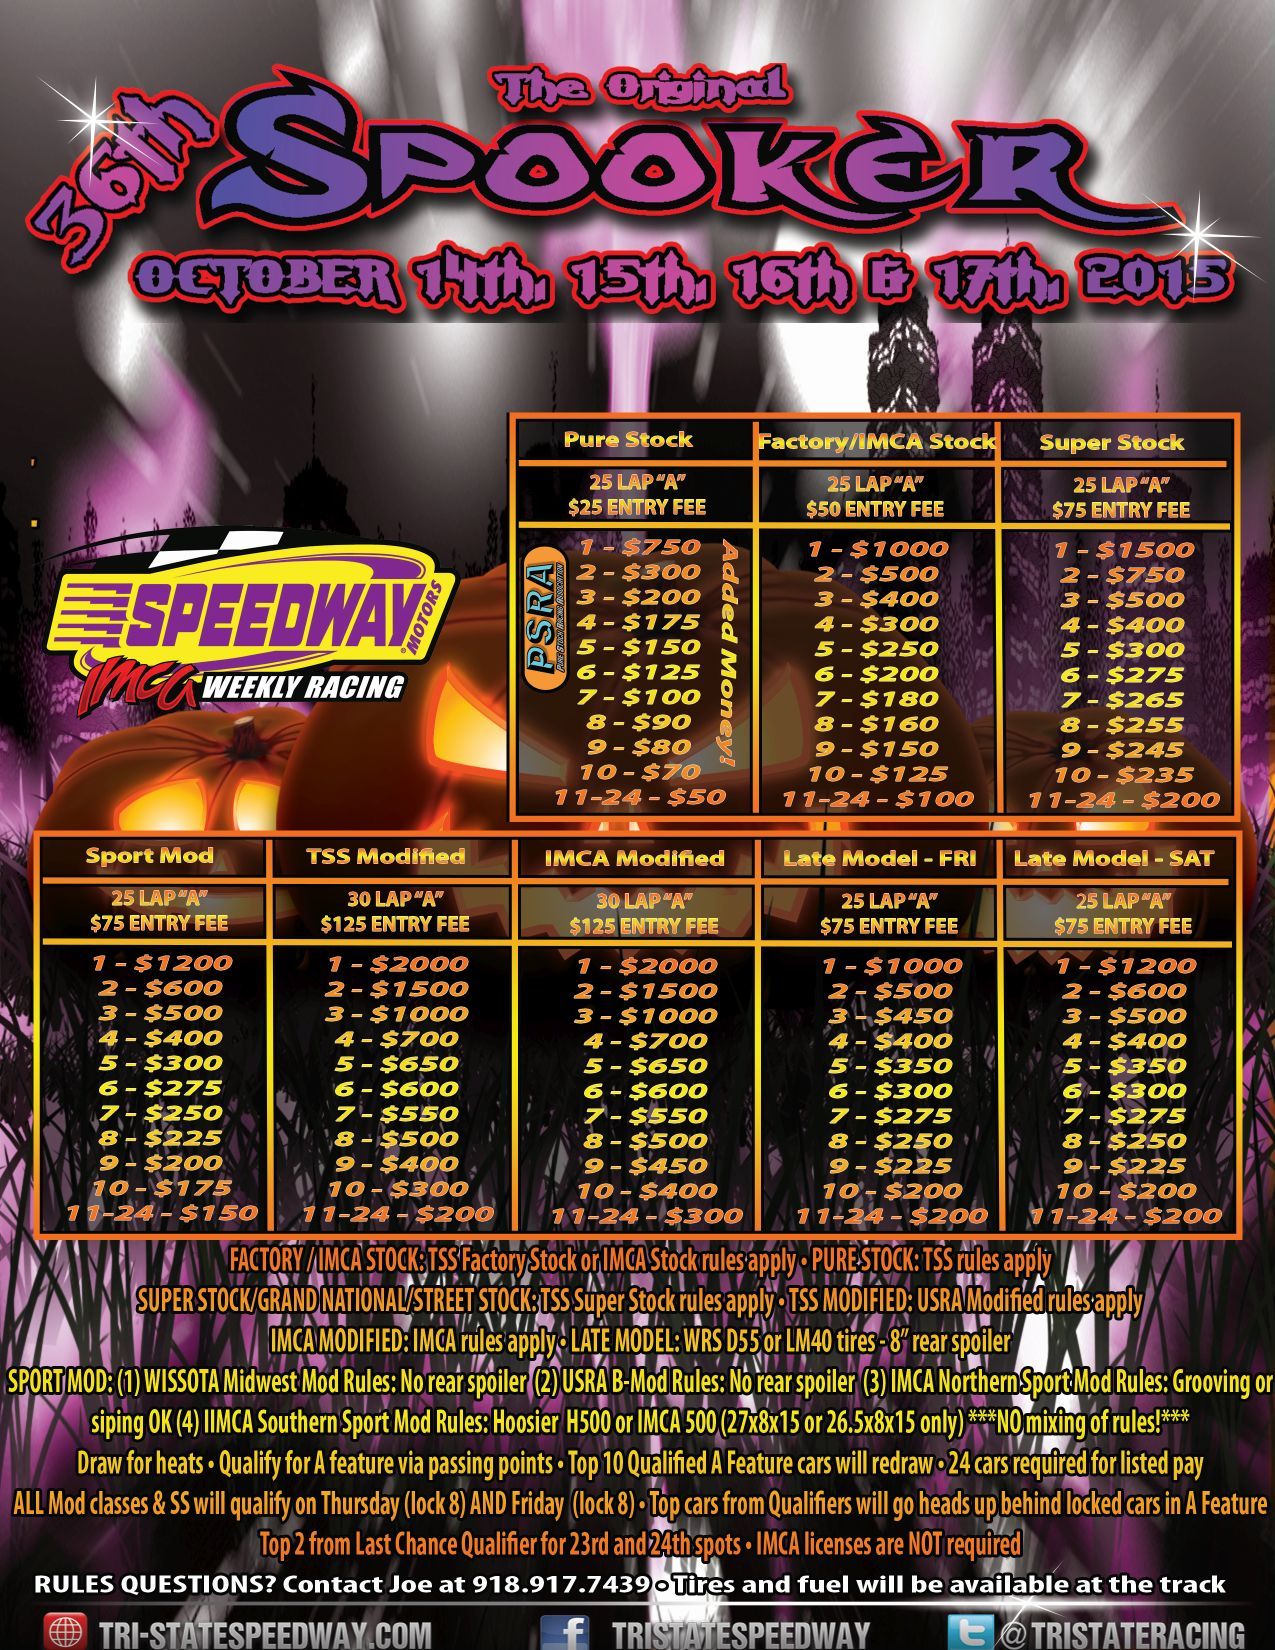 36th Annul Spooker flyer - BACK